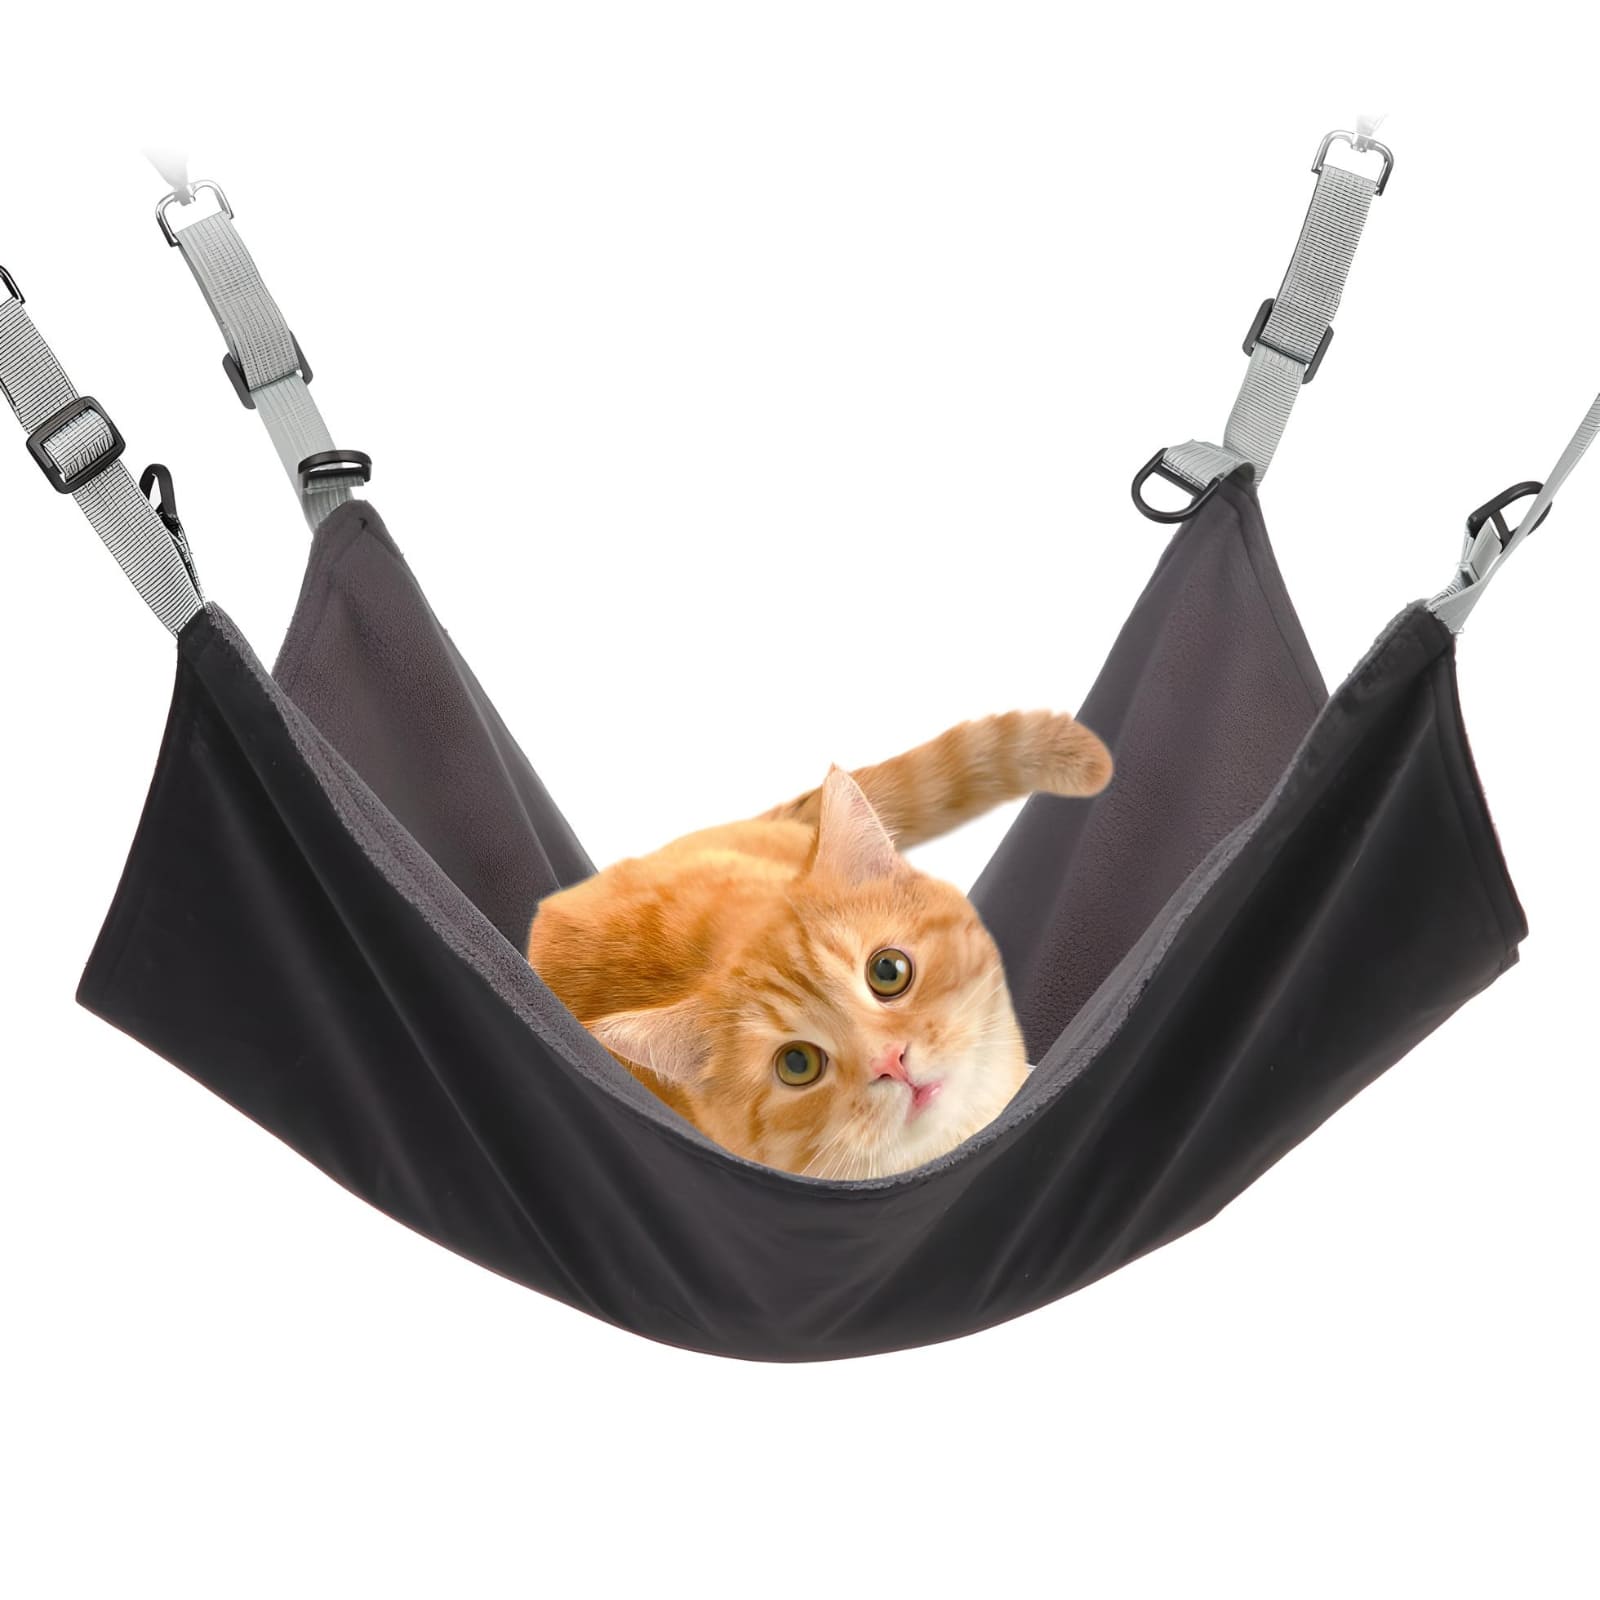 Hanging Pet Bed - Cozy Cat Hammock for Small Pets